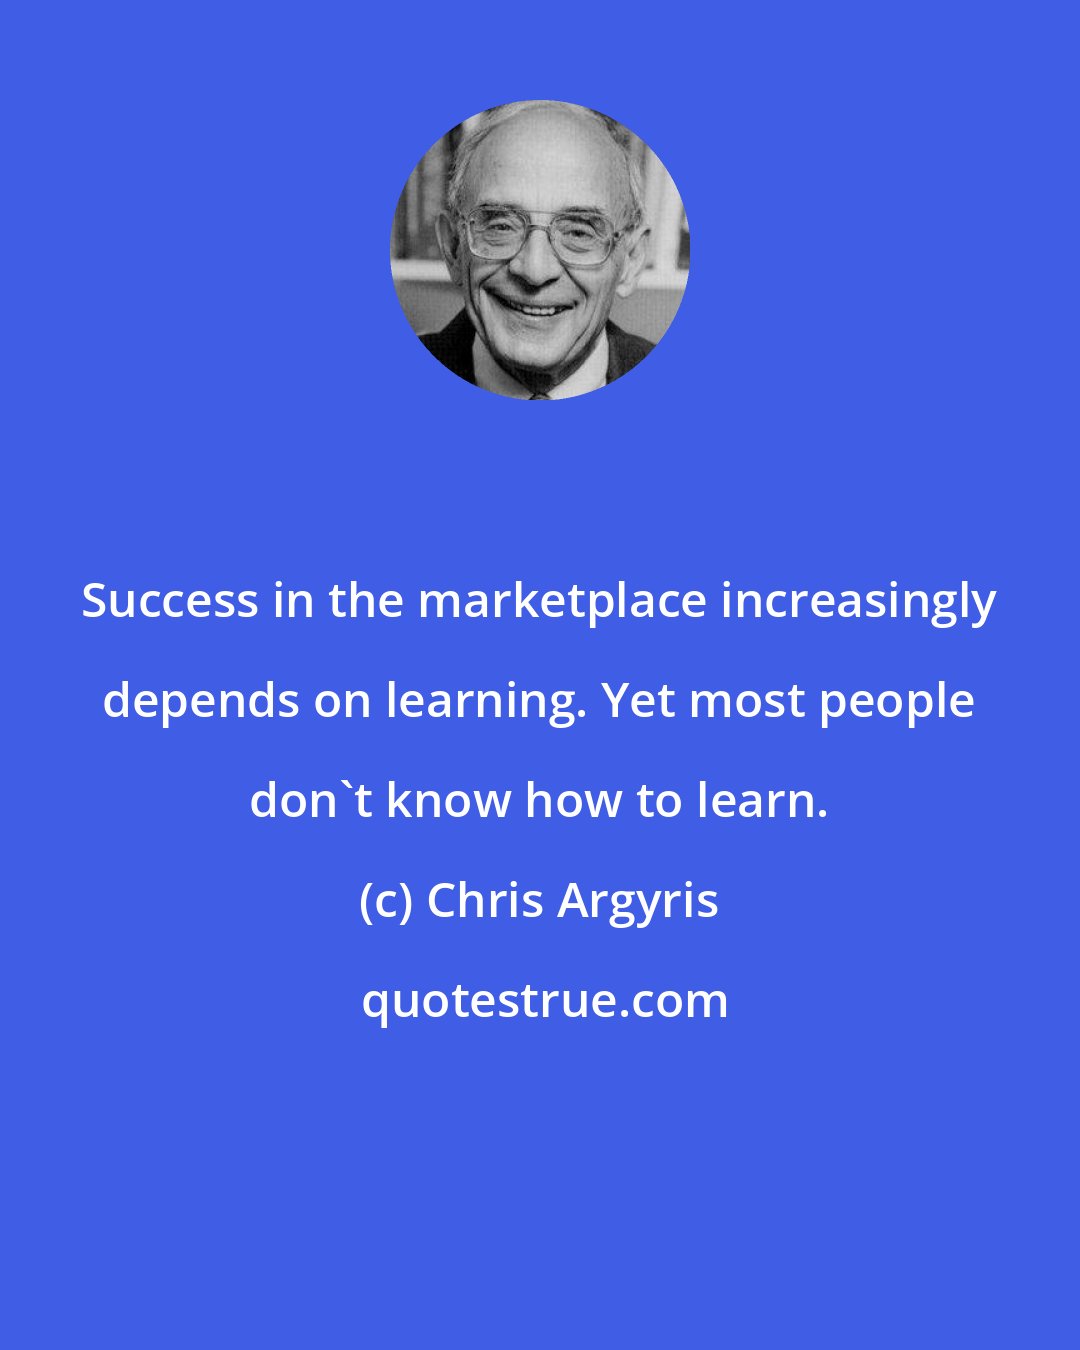 Chris Argyris: Success in the marketplace increasingly depends on learning. Yet most people don't know how to learn.